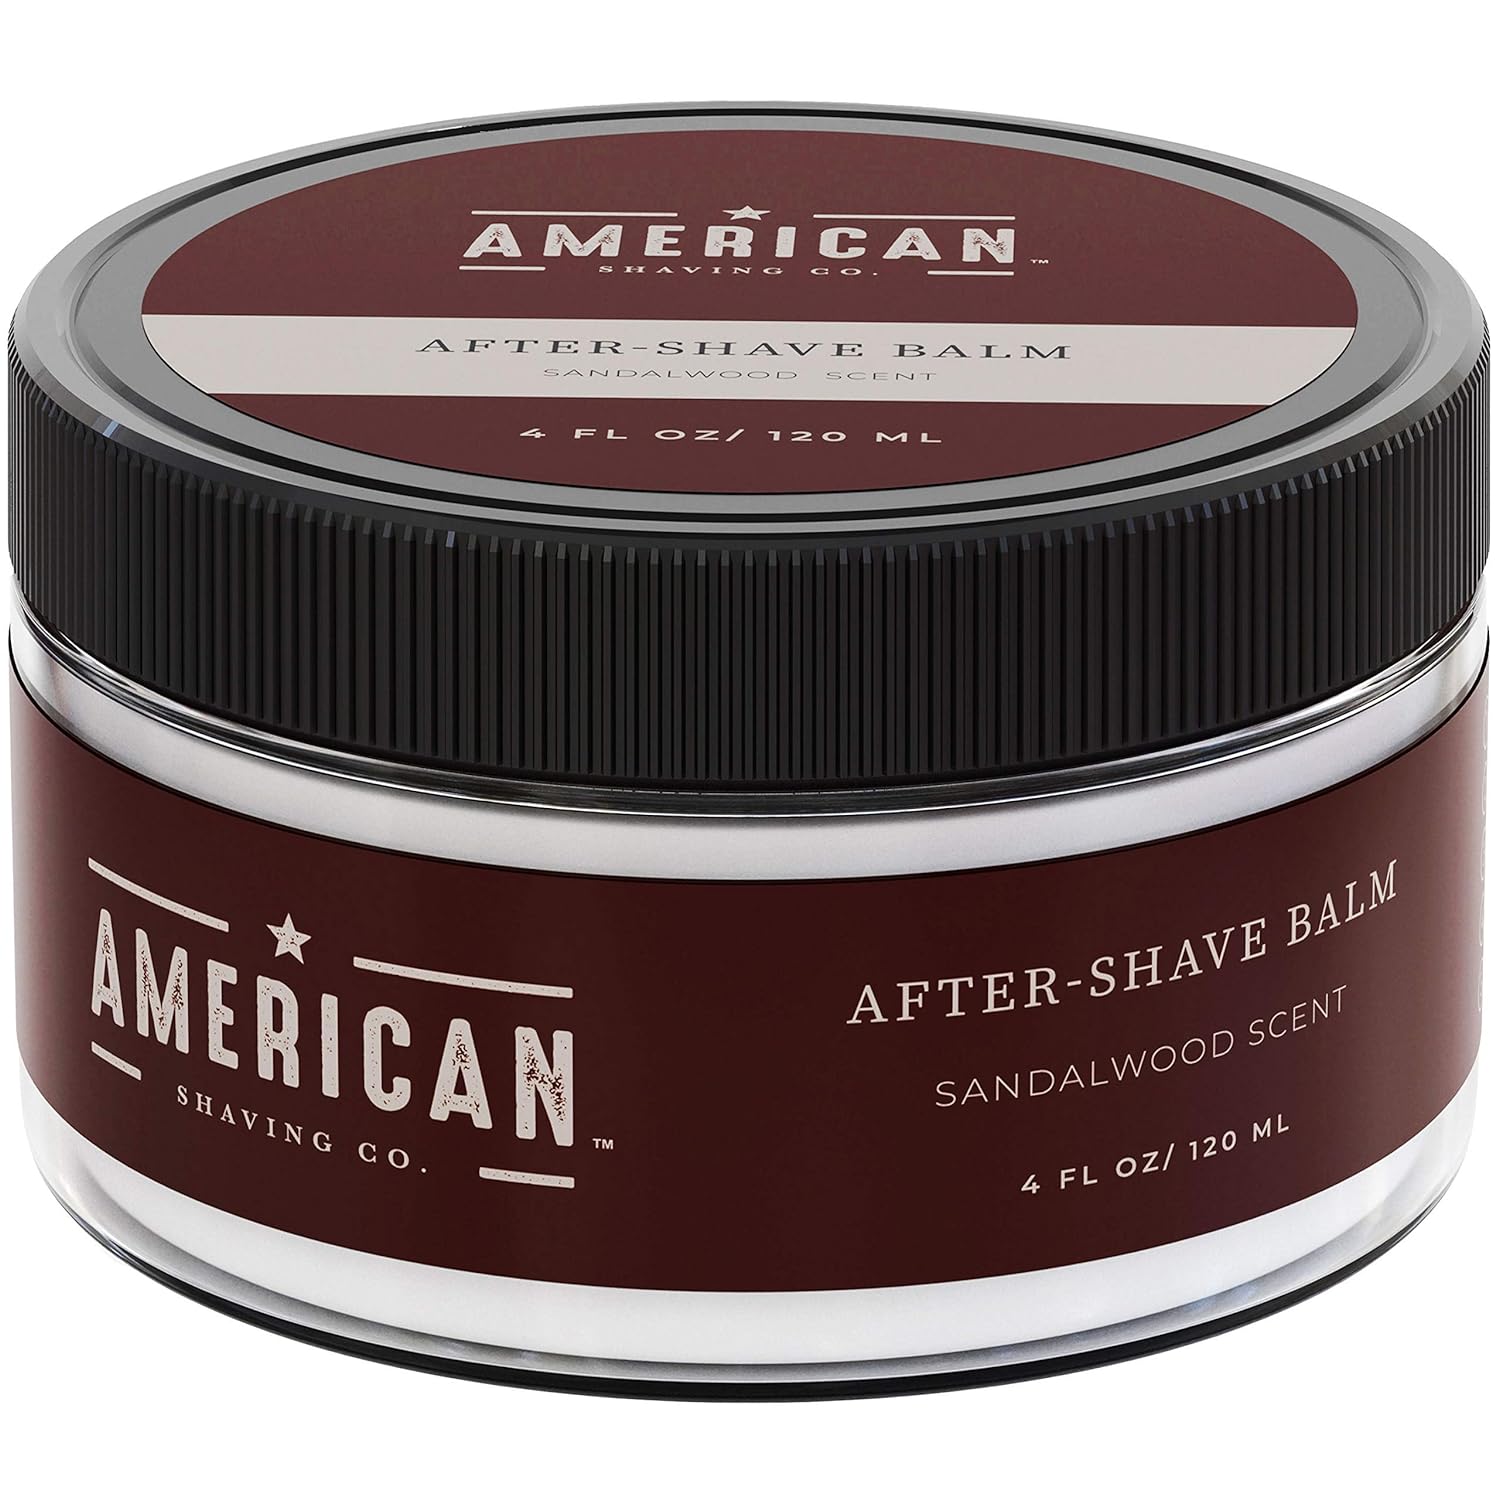 American Shaving Co. After Shave Balm for Smooth (Sandalwood Scent), Silky & Irritation Free Skin Care, Soothes and Moisturizes Face After Shaving, Treats Redness & Razor Burn, Post Shave Lotion 4